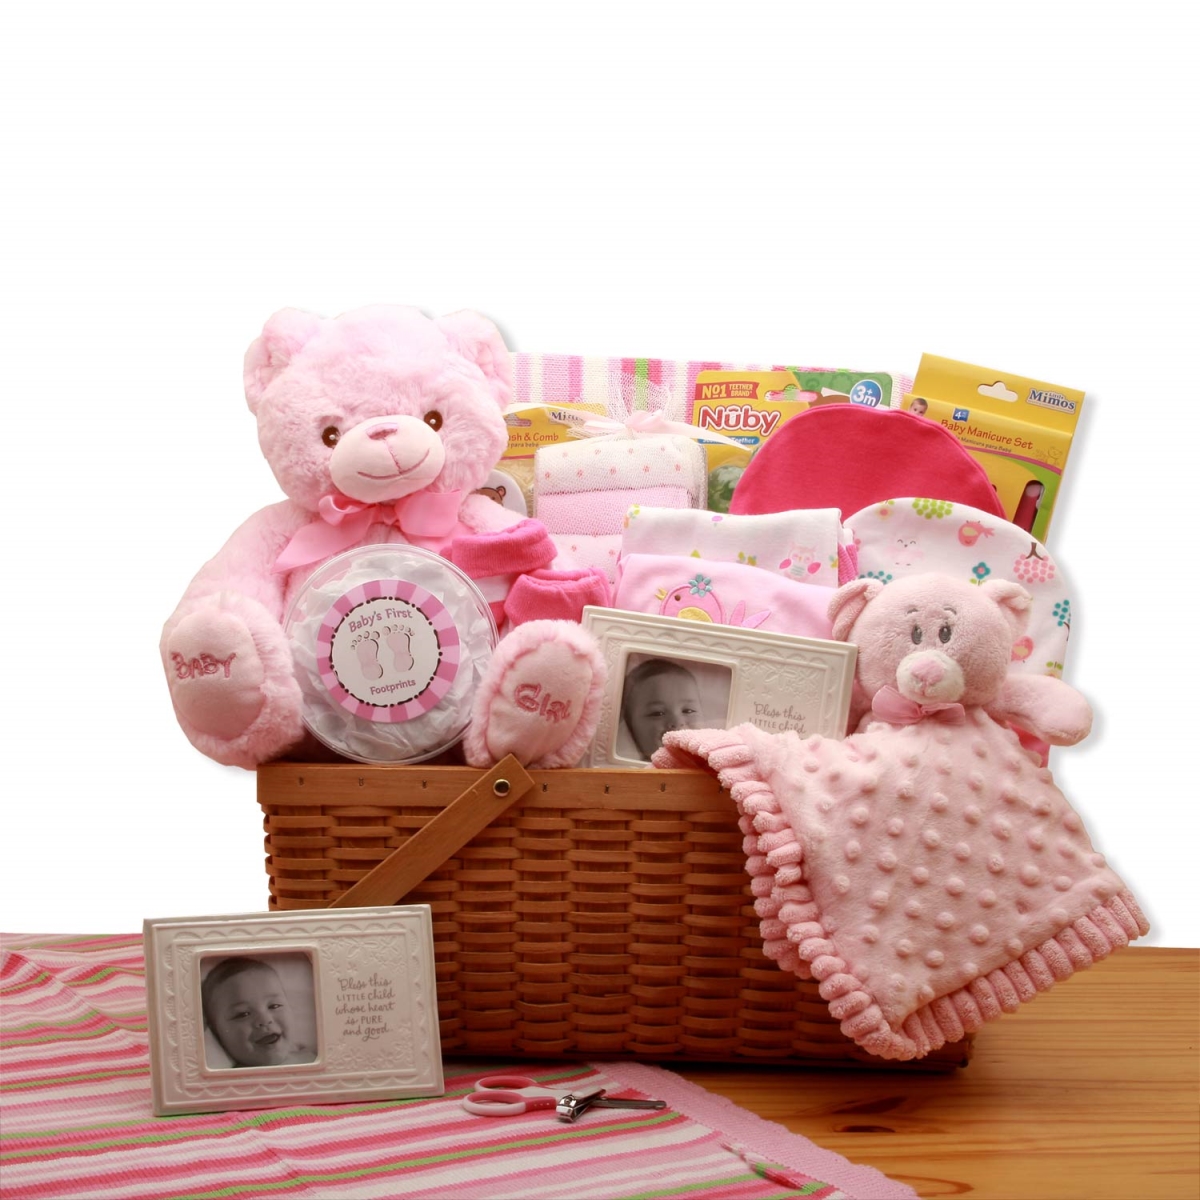 890792-p My First Teddy Bear New Baby Gift Basket - Pink